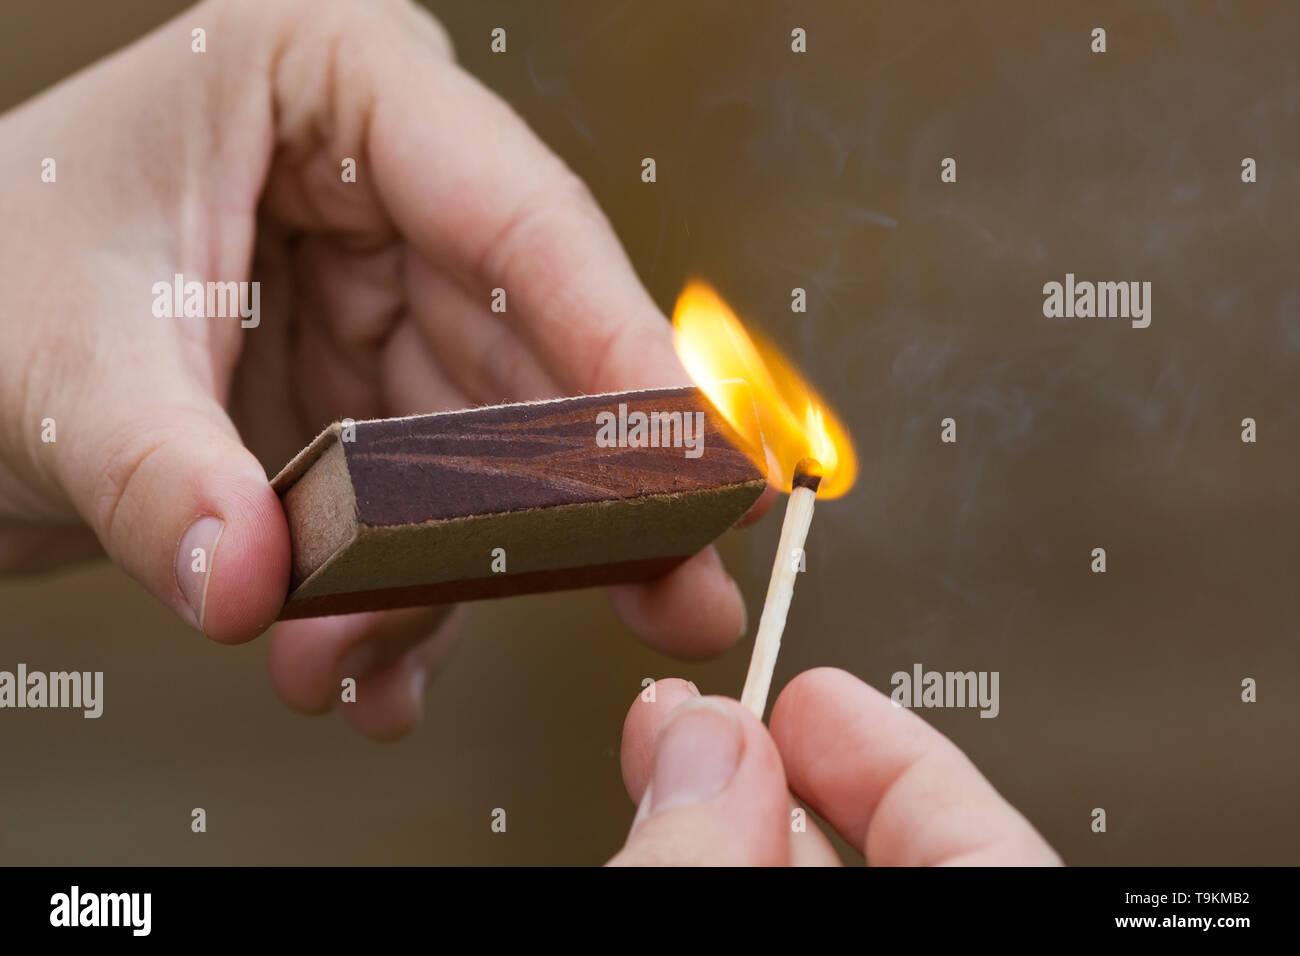 hands striking a match on blurred background, closeup Stock Photo